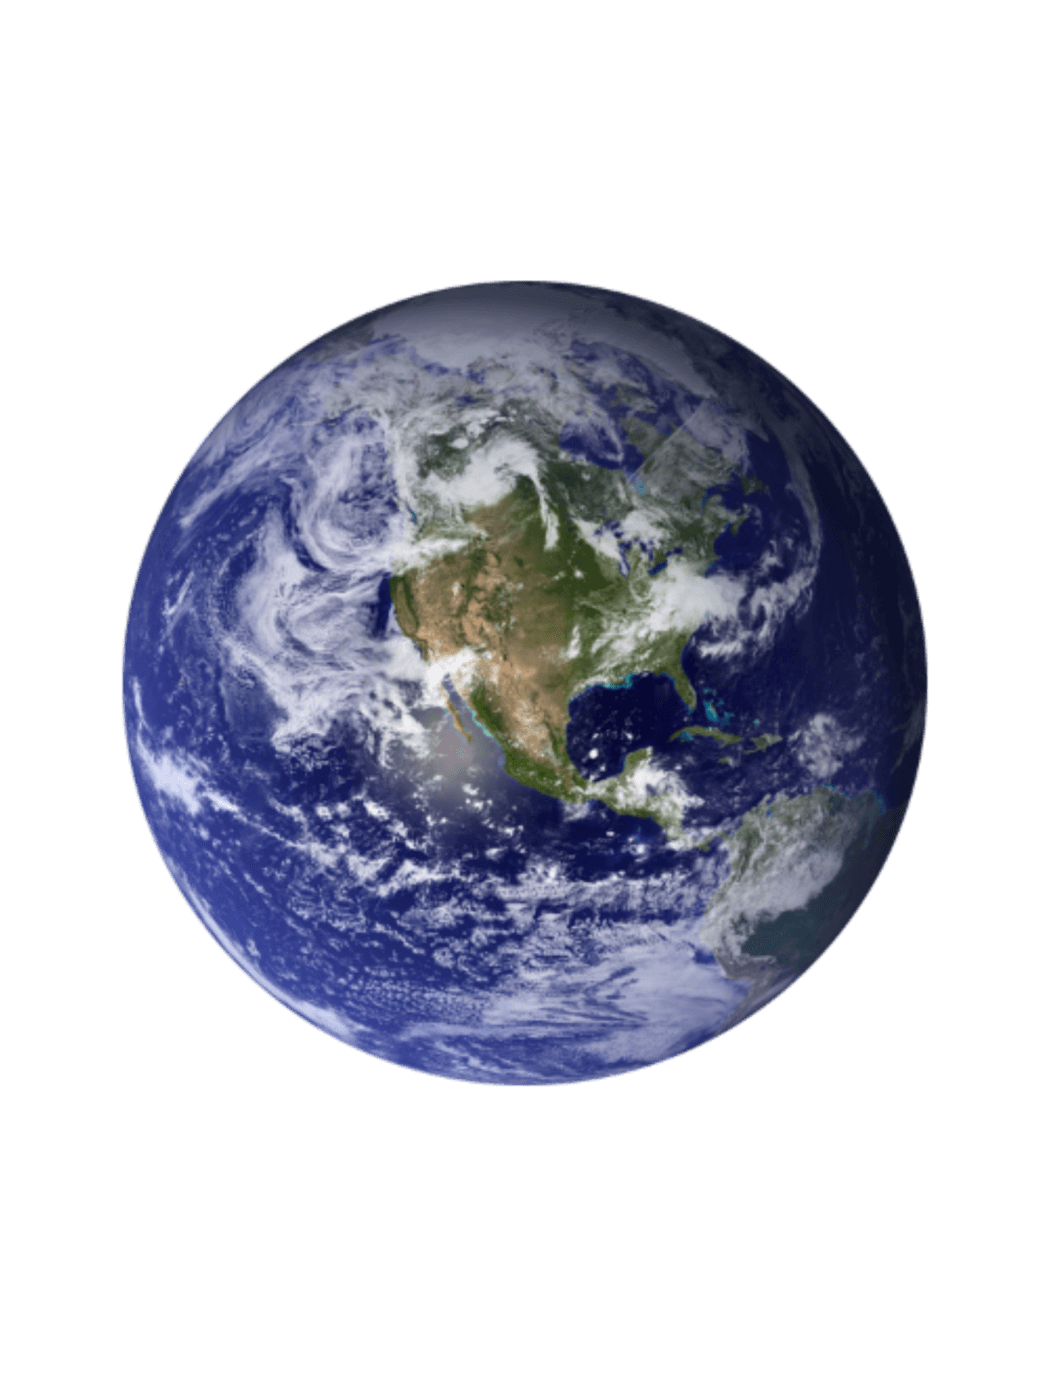 Photo of planet earth